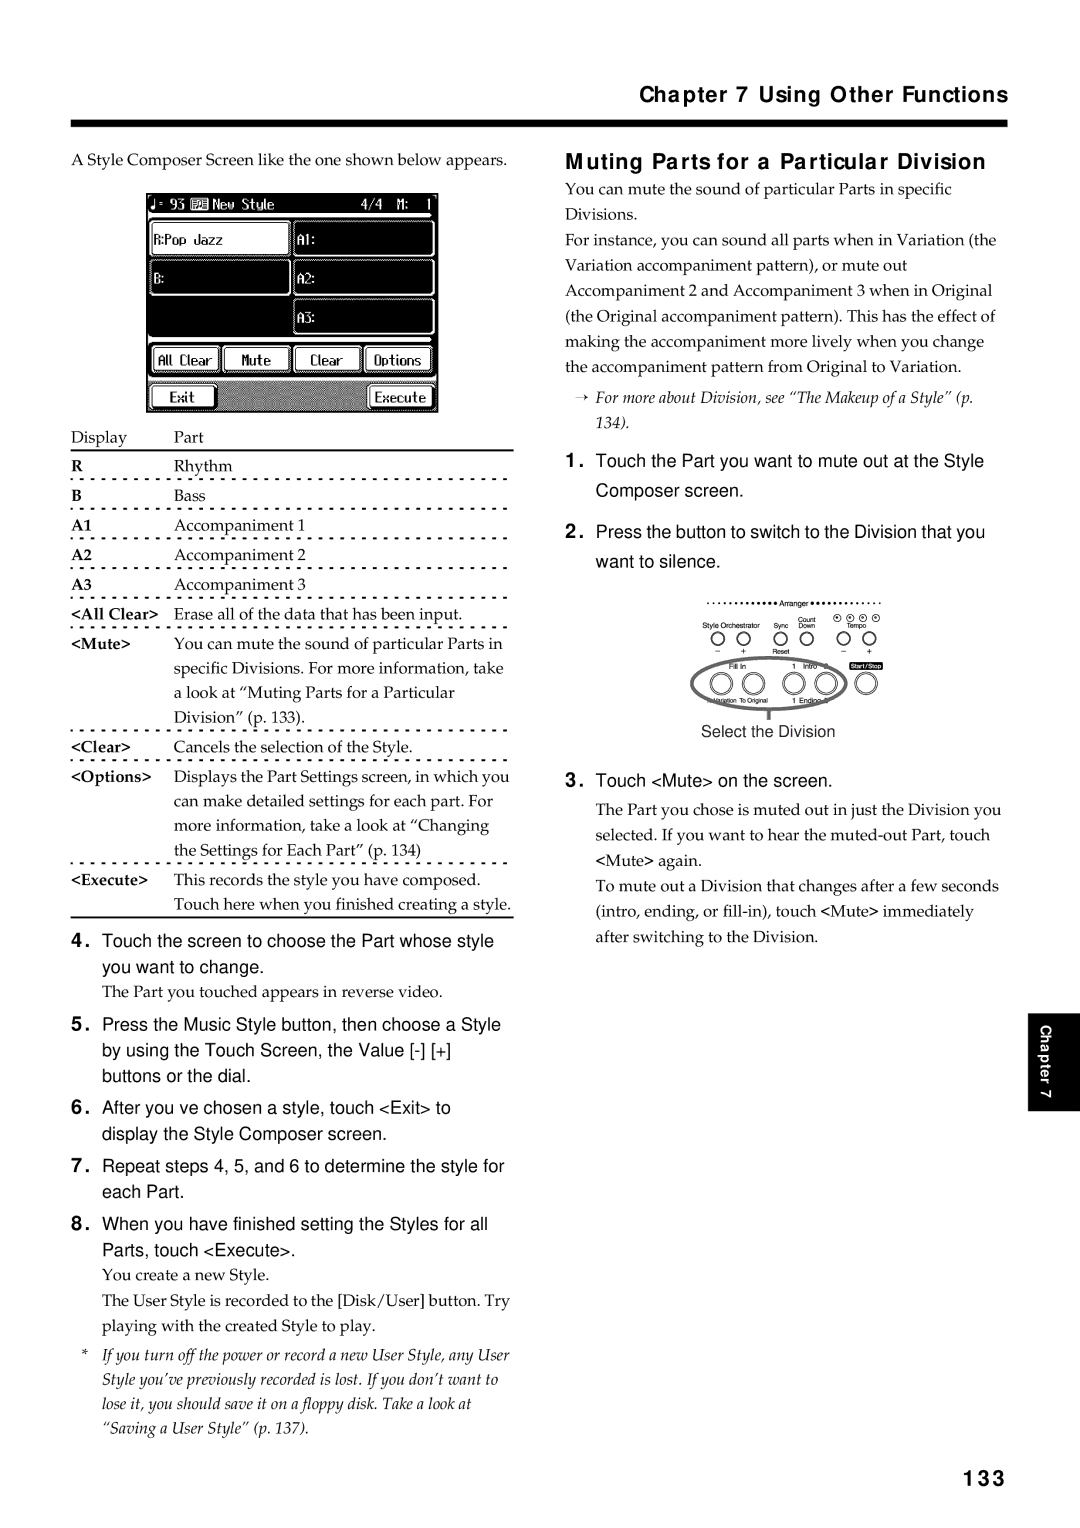 Roland KF-90 owner manual Using Other Functions, Muting Parts for a Particular Division, 133, Touch Mute on the screen 